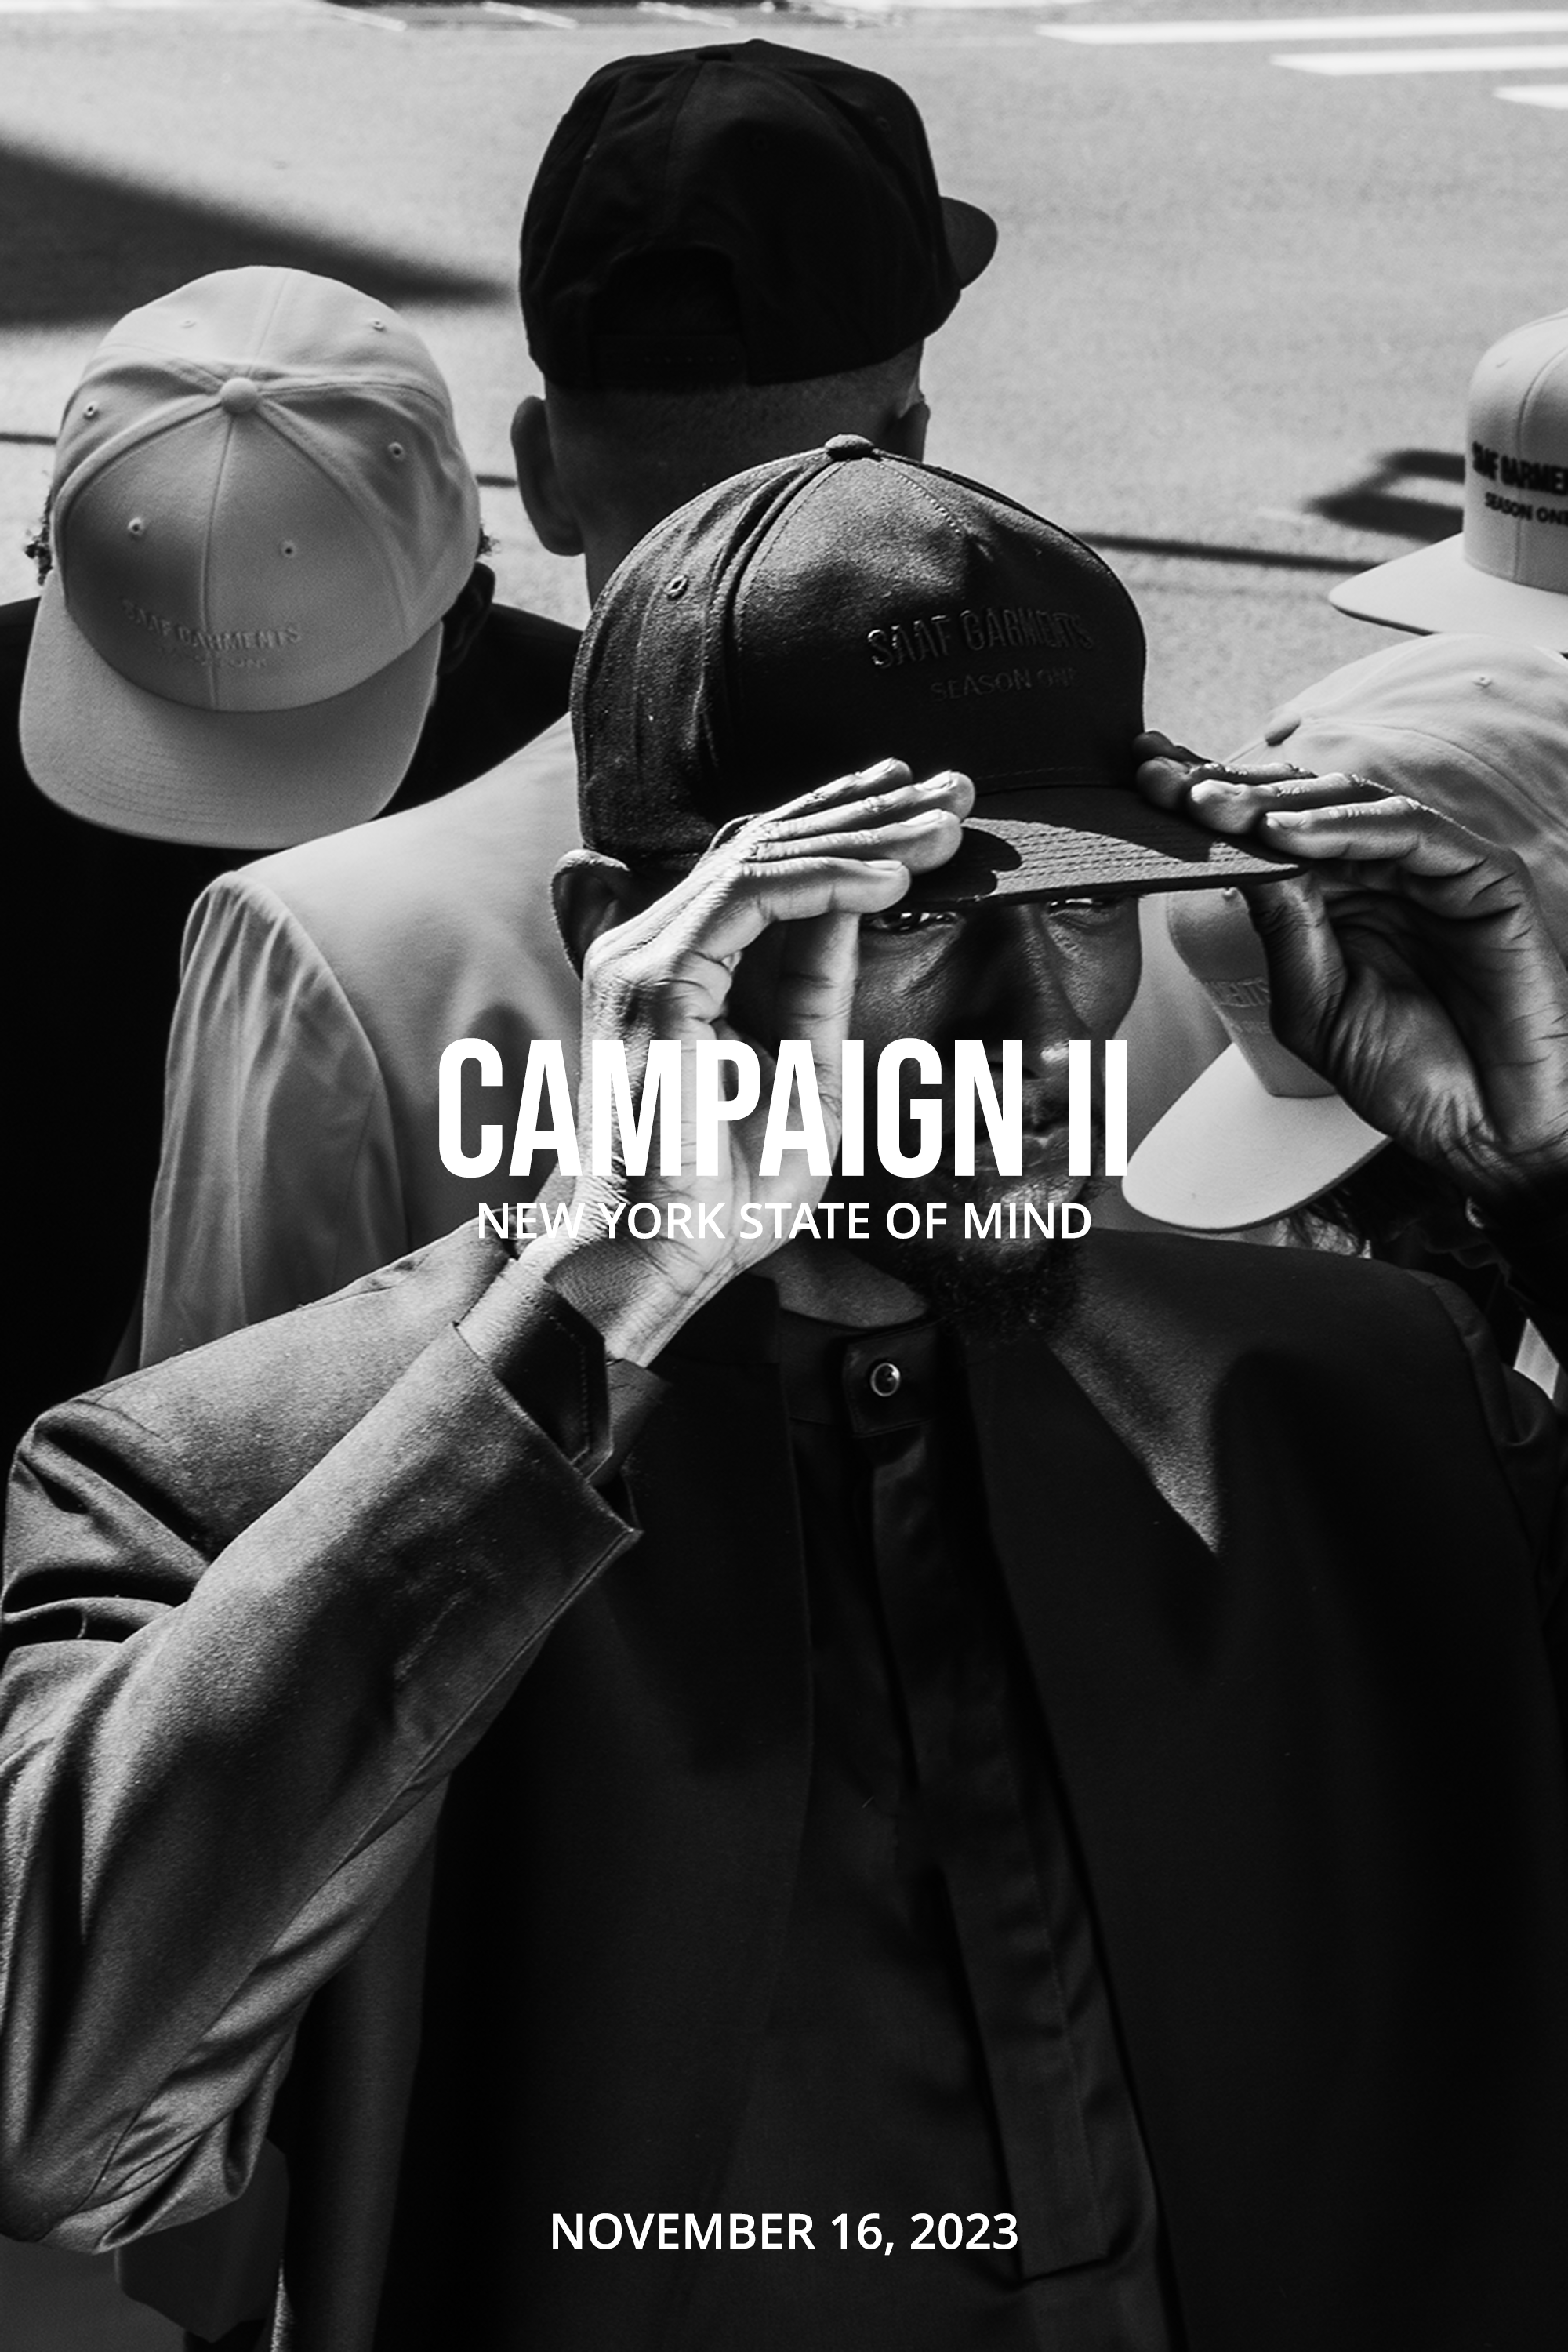 "Campaign II - New York State of Mind"